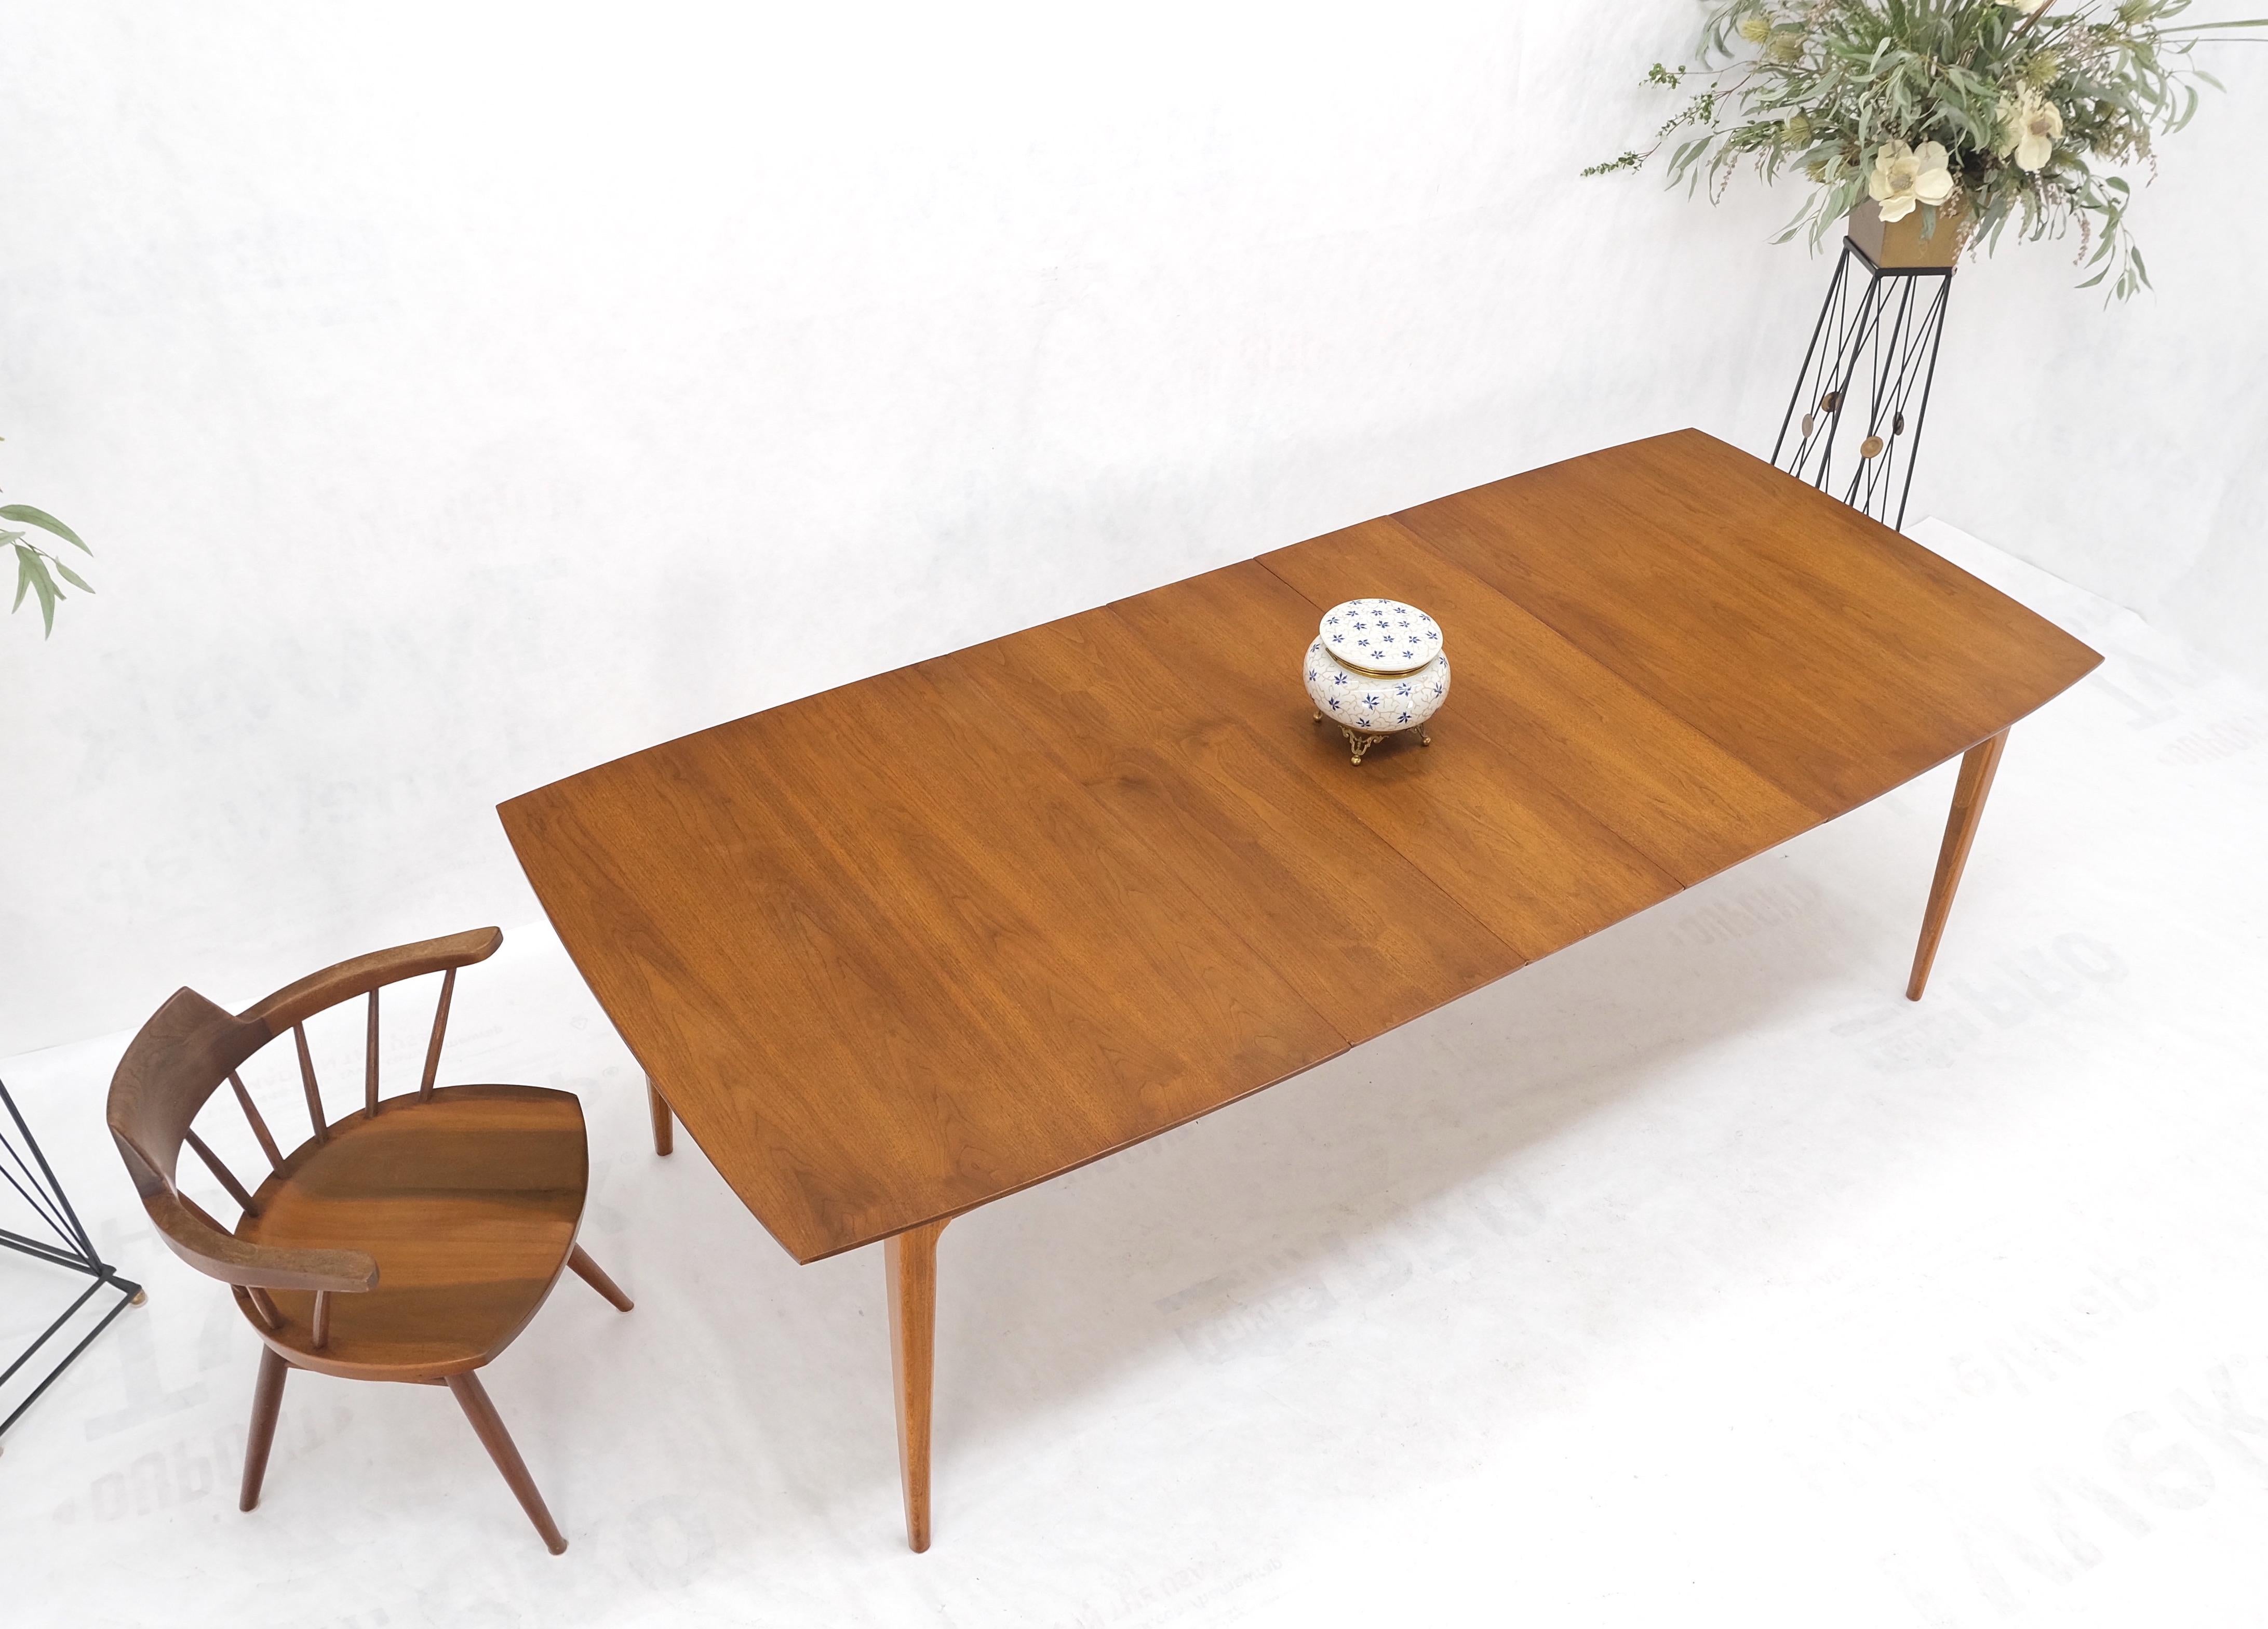 Light Walnut American Mid-Century Modern Boat Shape Dining Table 3 Leaves Mint! For Sale 5